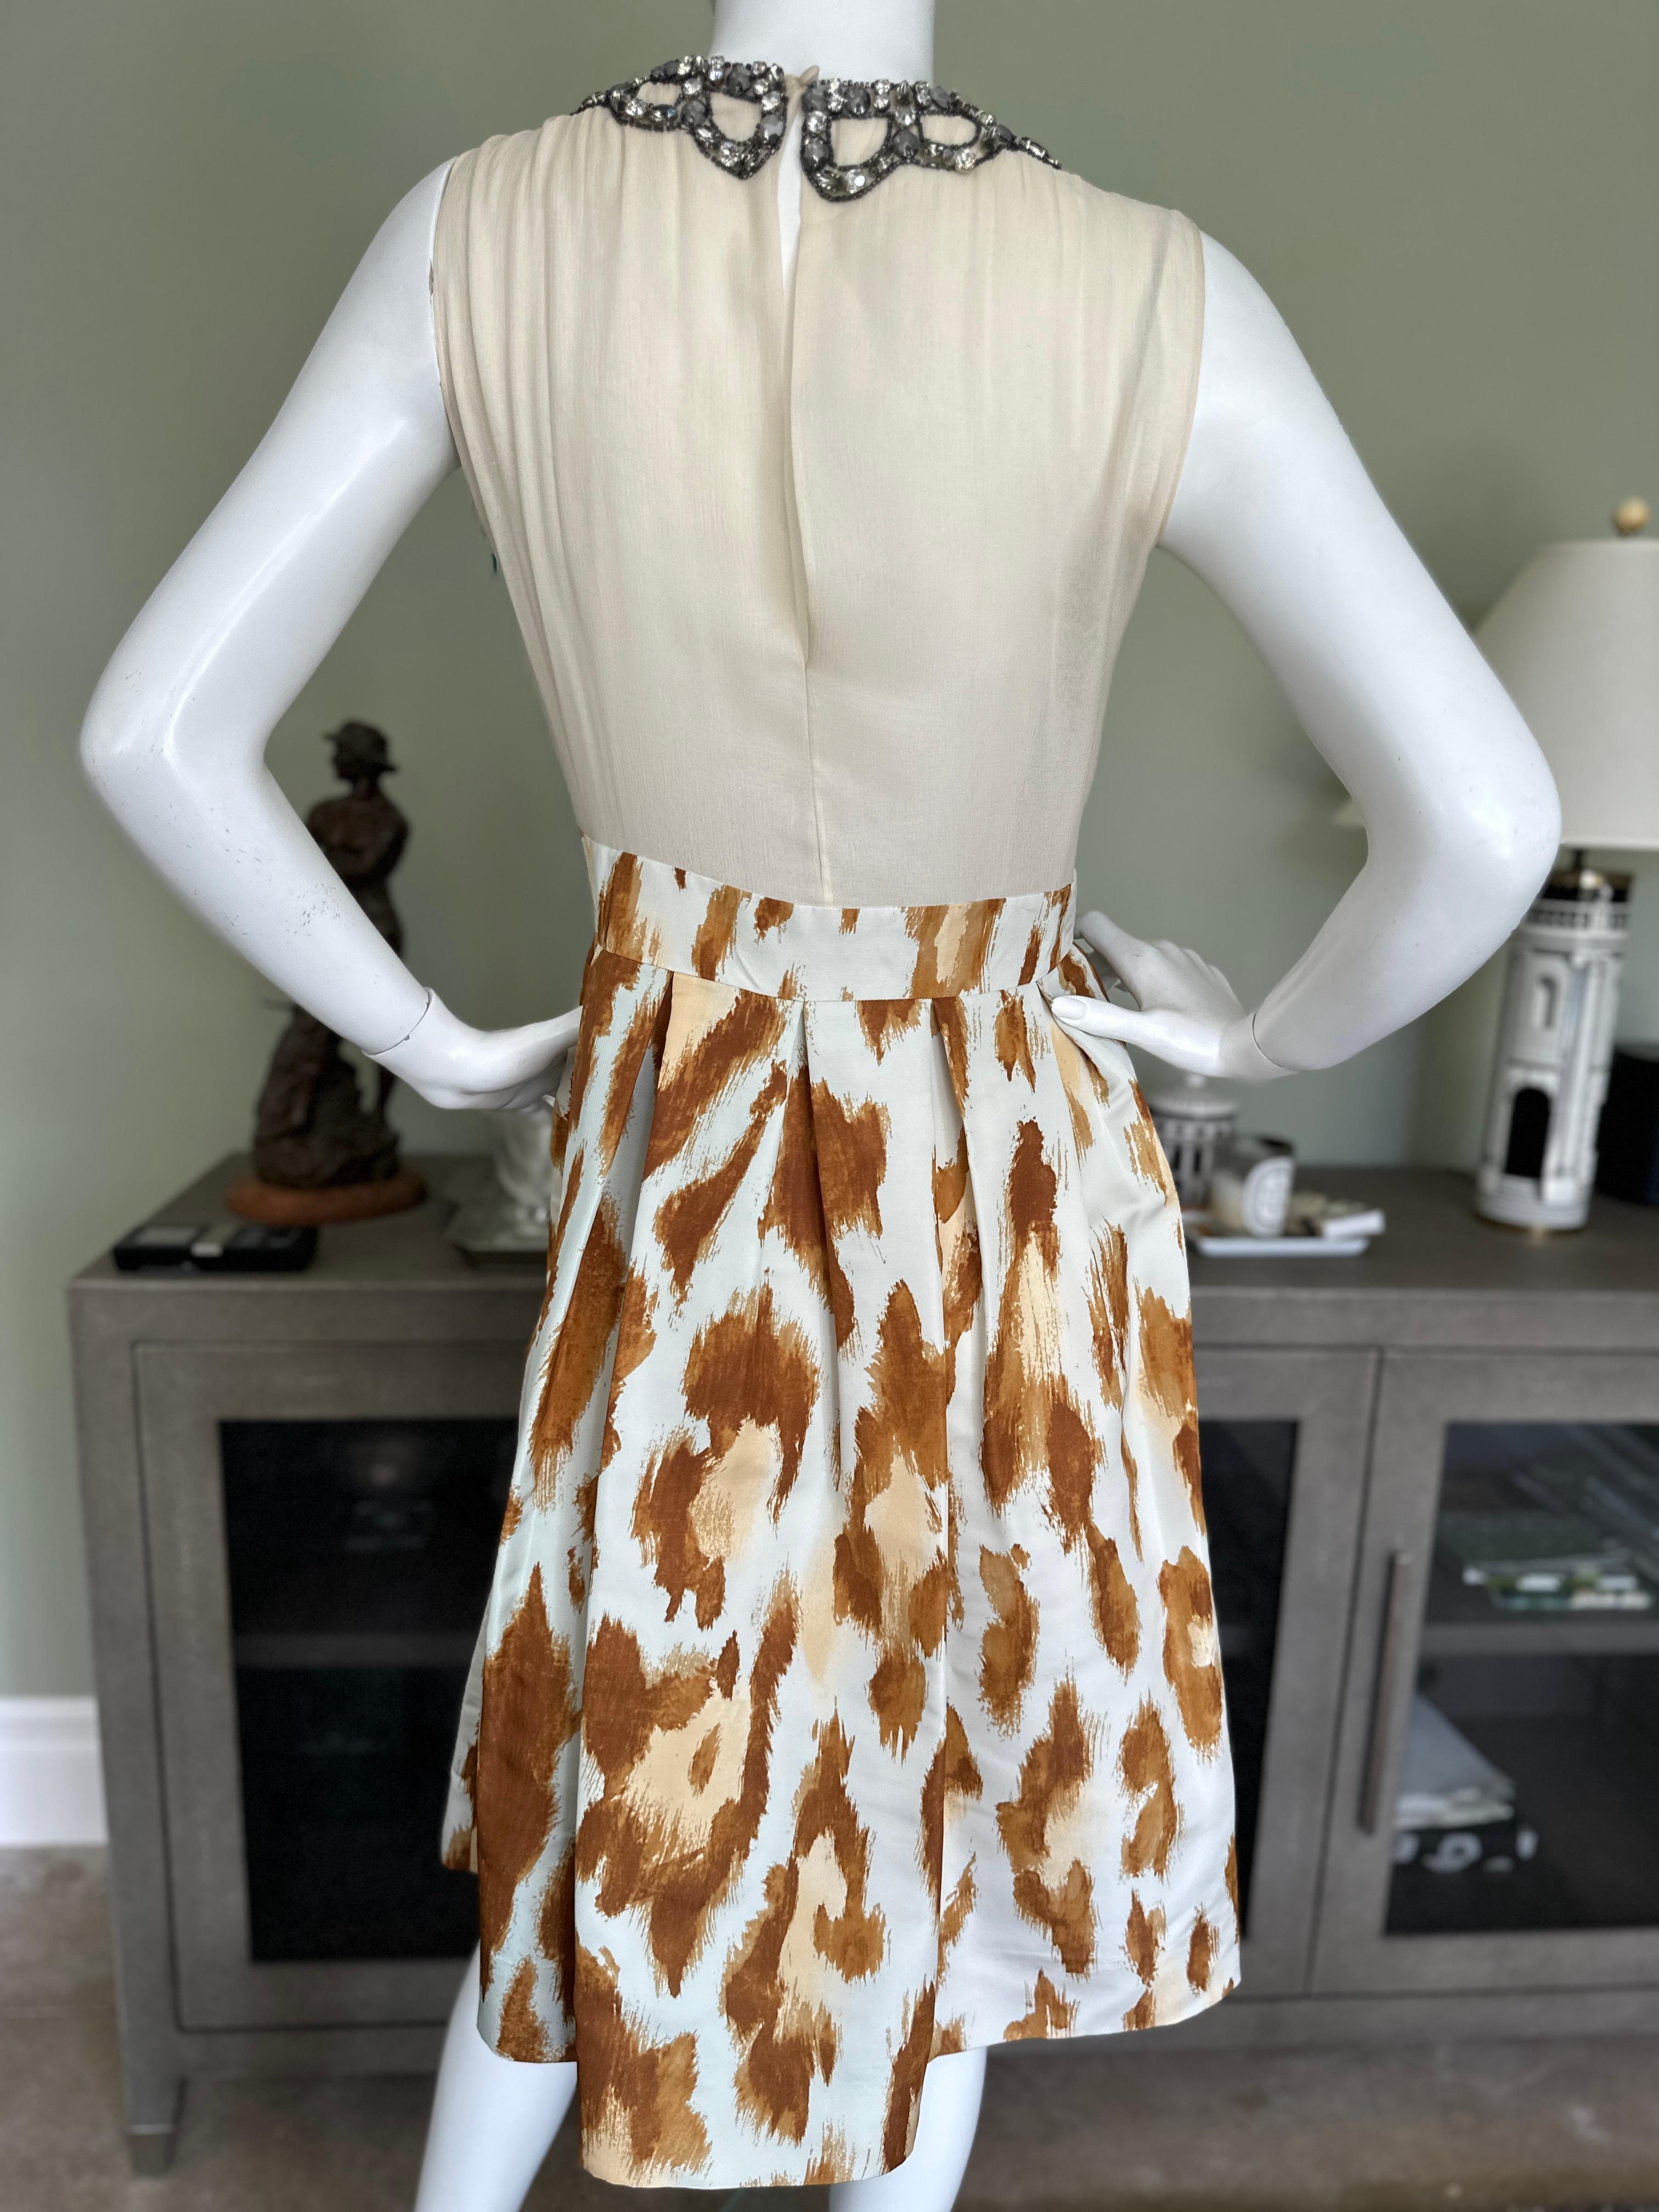 Dior by Galliano Silk Leopard Print Cocktail Dress with Lesage Jeweled Necklace For Sale 7